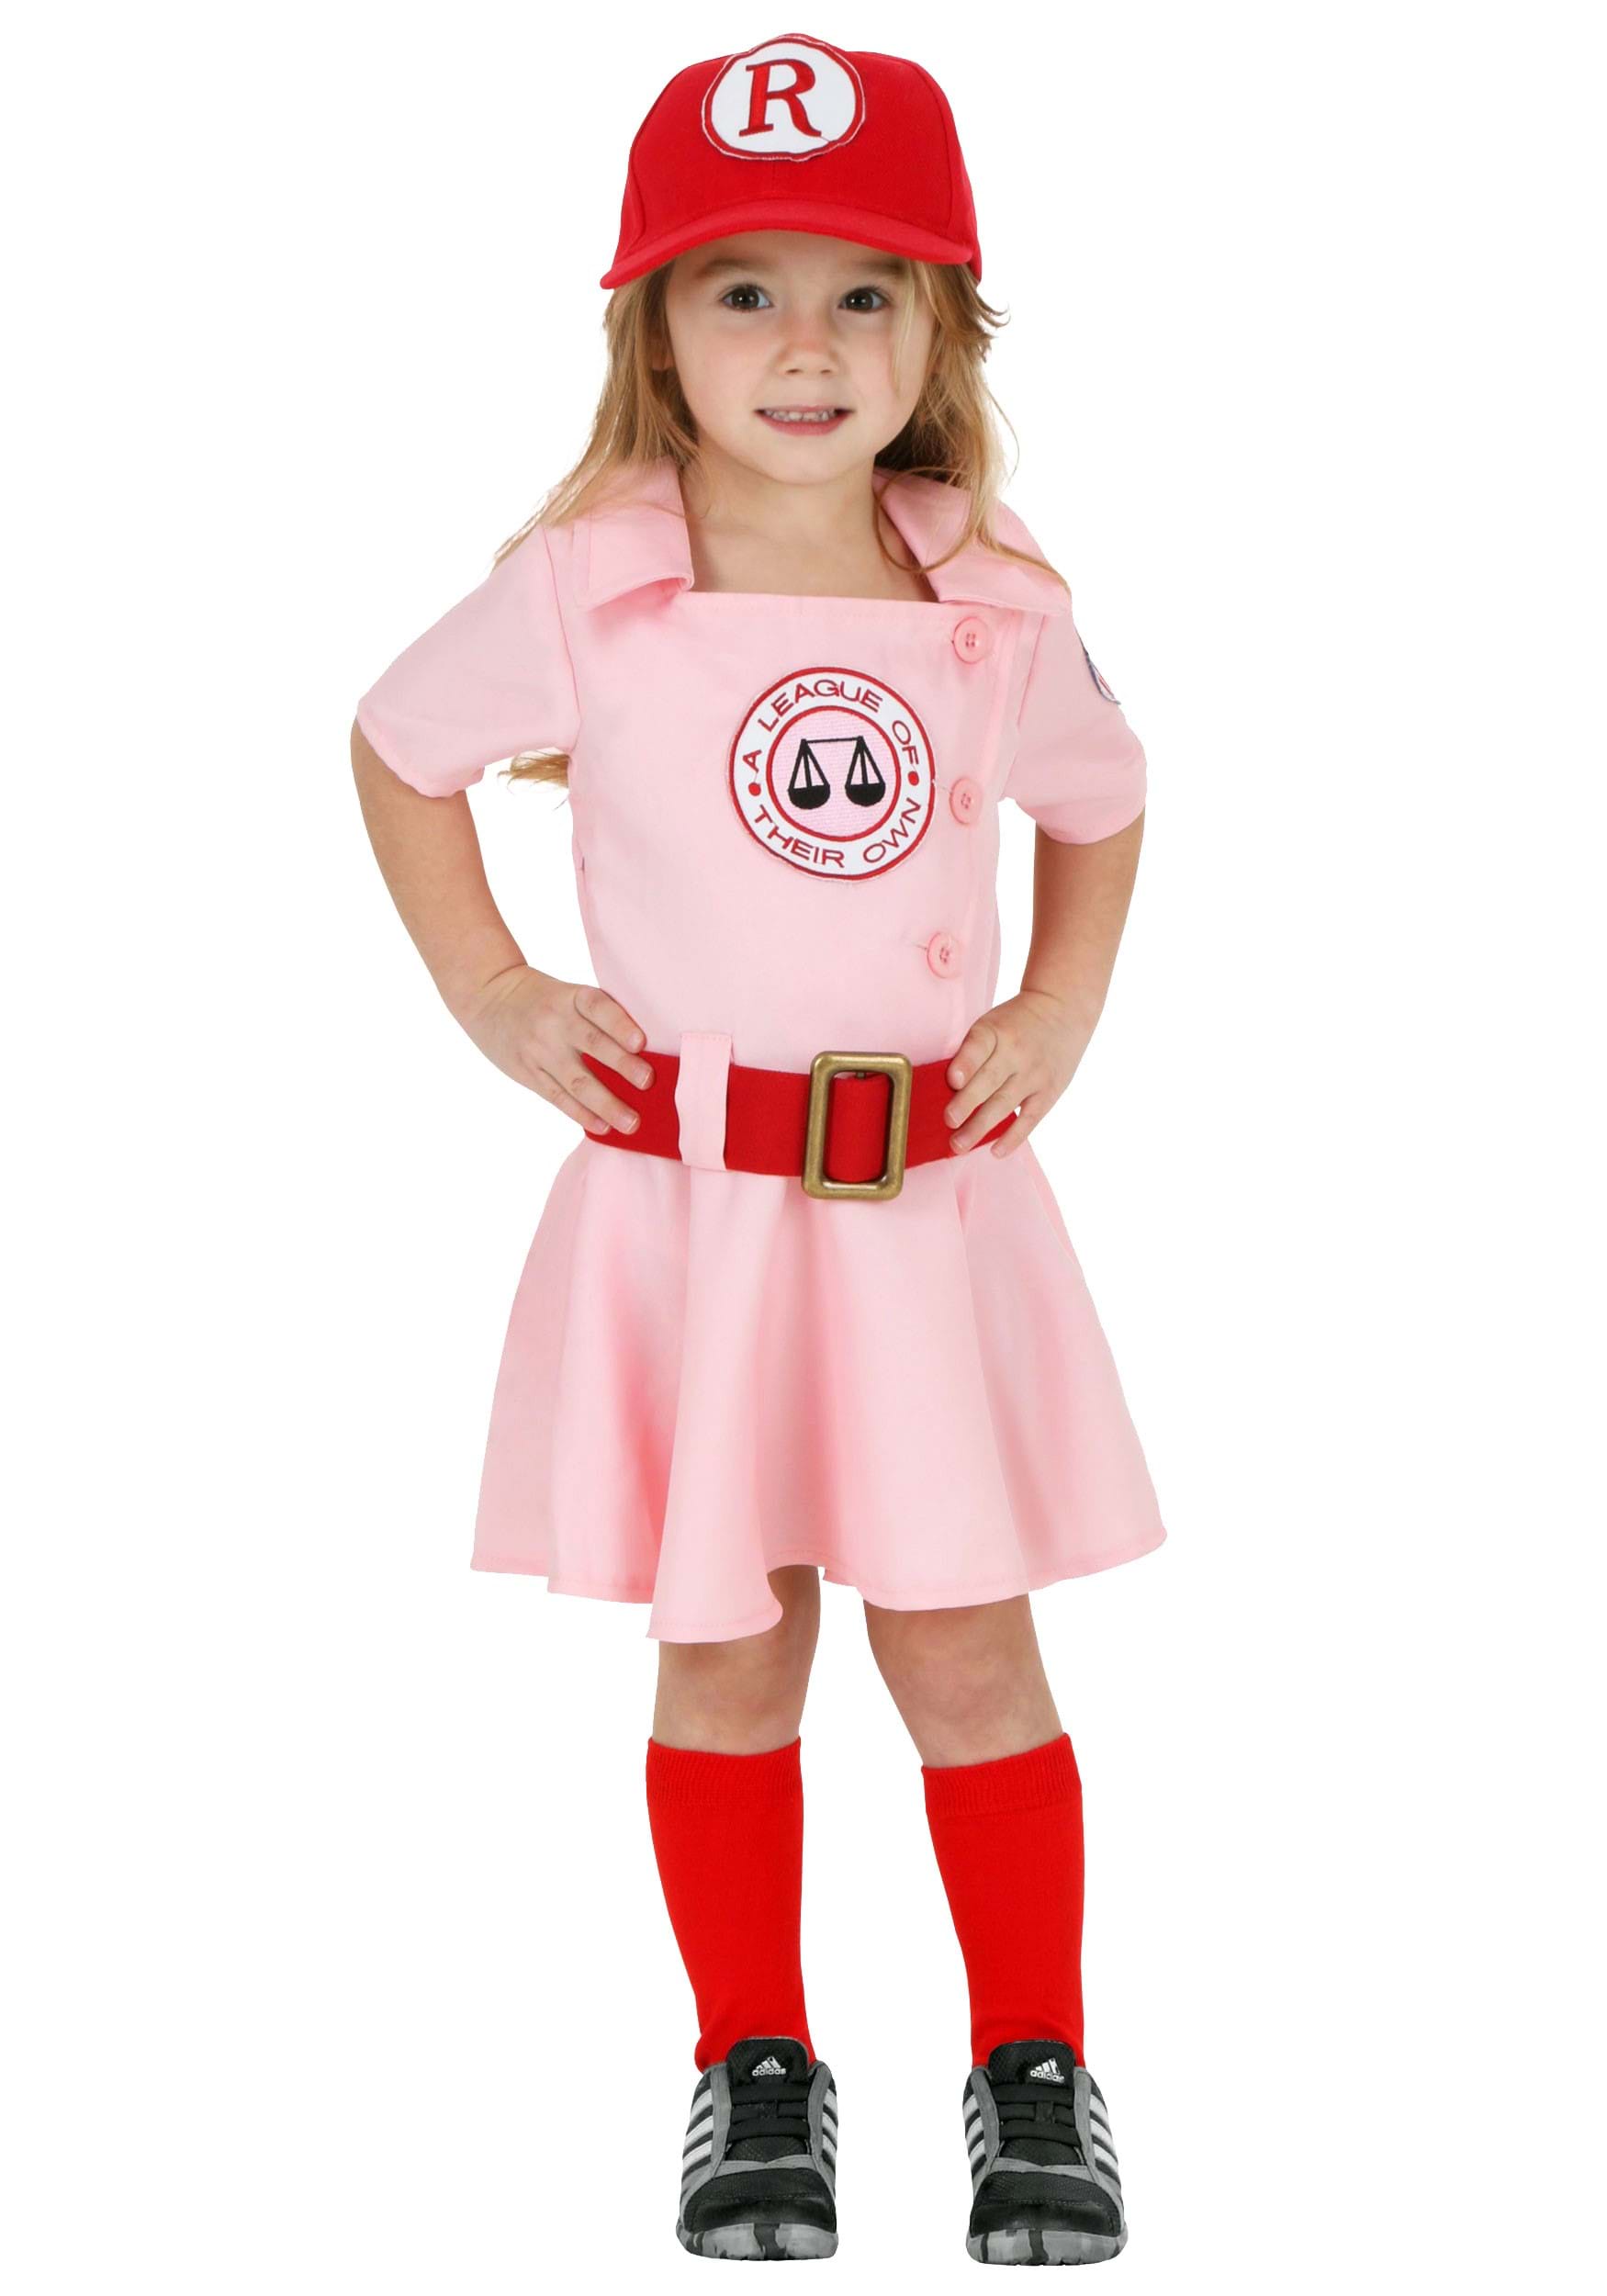 Toddler Dottie Costume from A League of Their Own